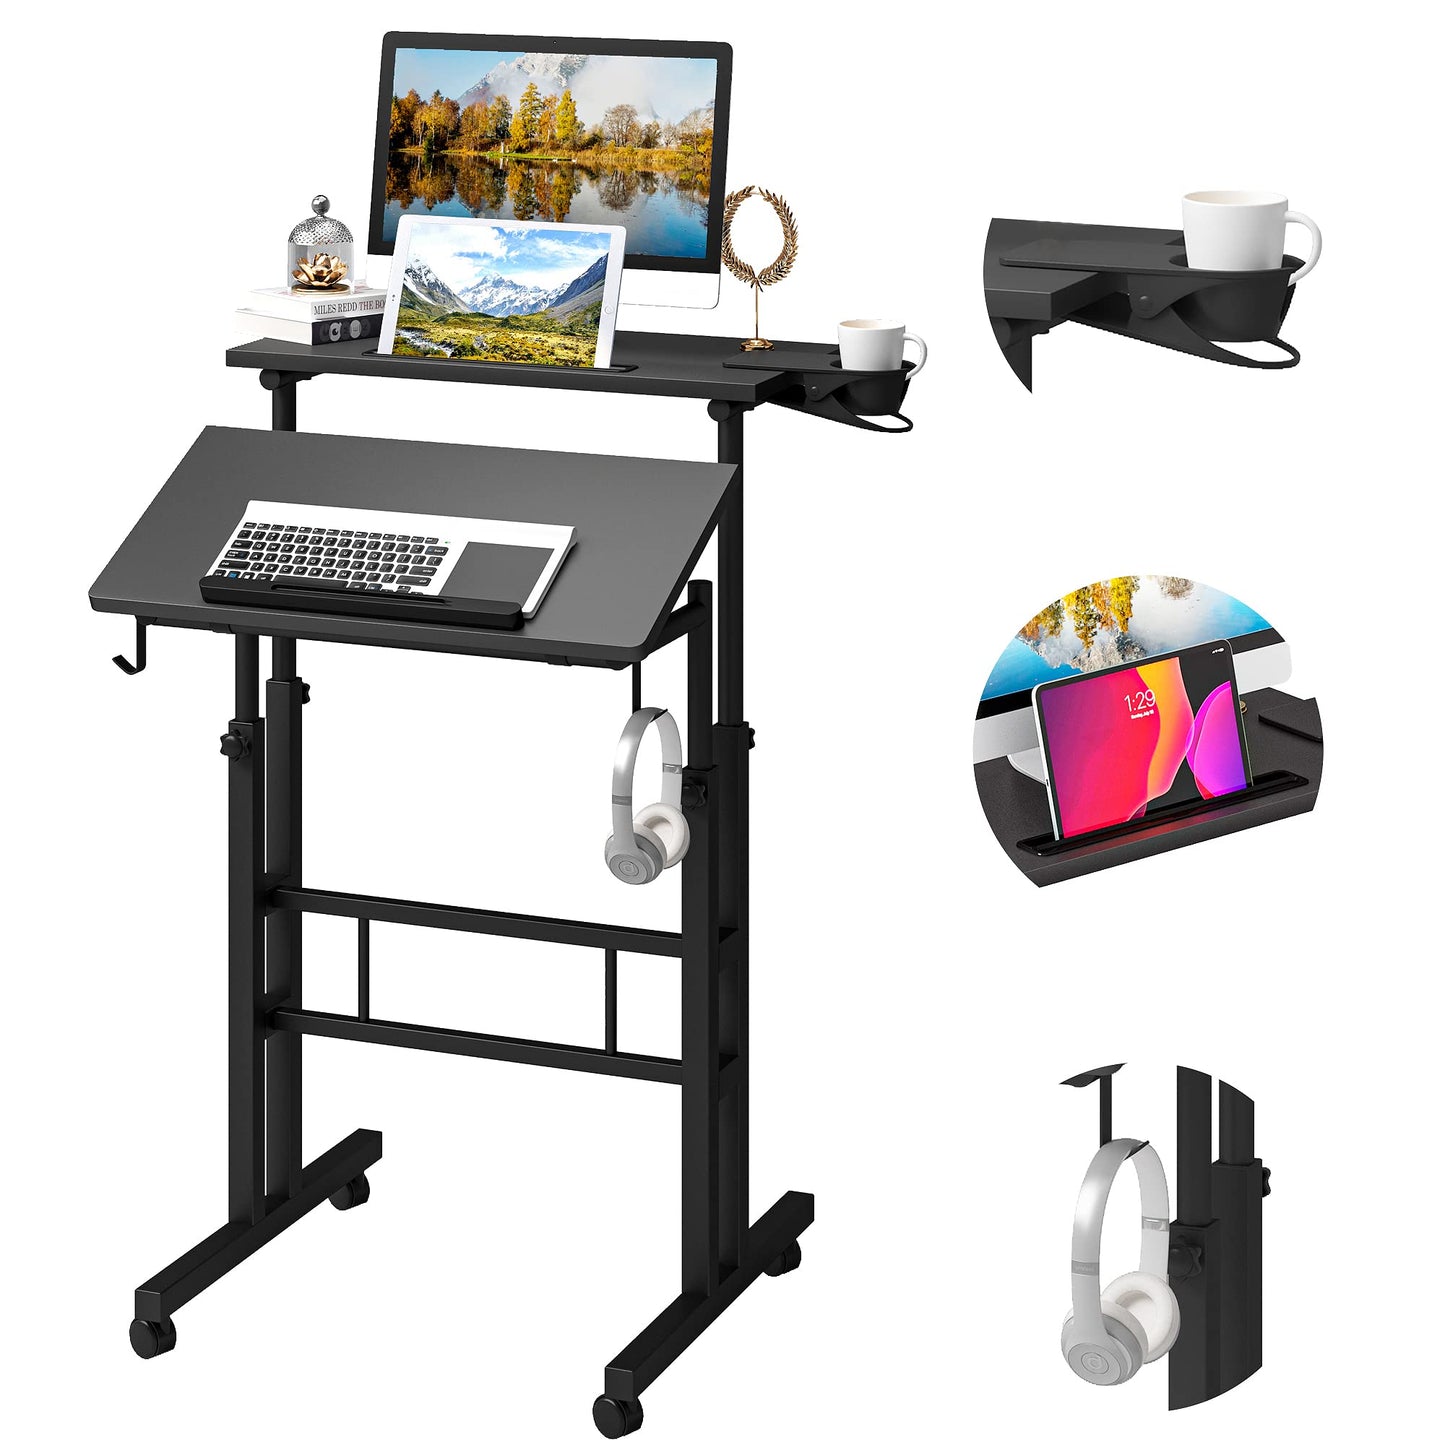 Klvied Adjustable Height Standing Desk with Cup Holder, Portable and Easy to Move, Ideal for Home or Office, Black